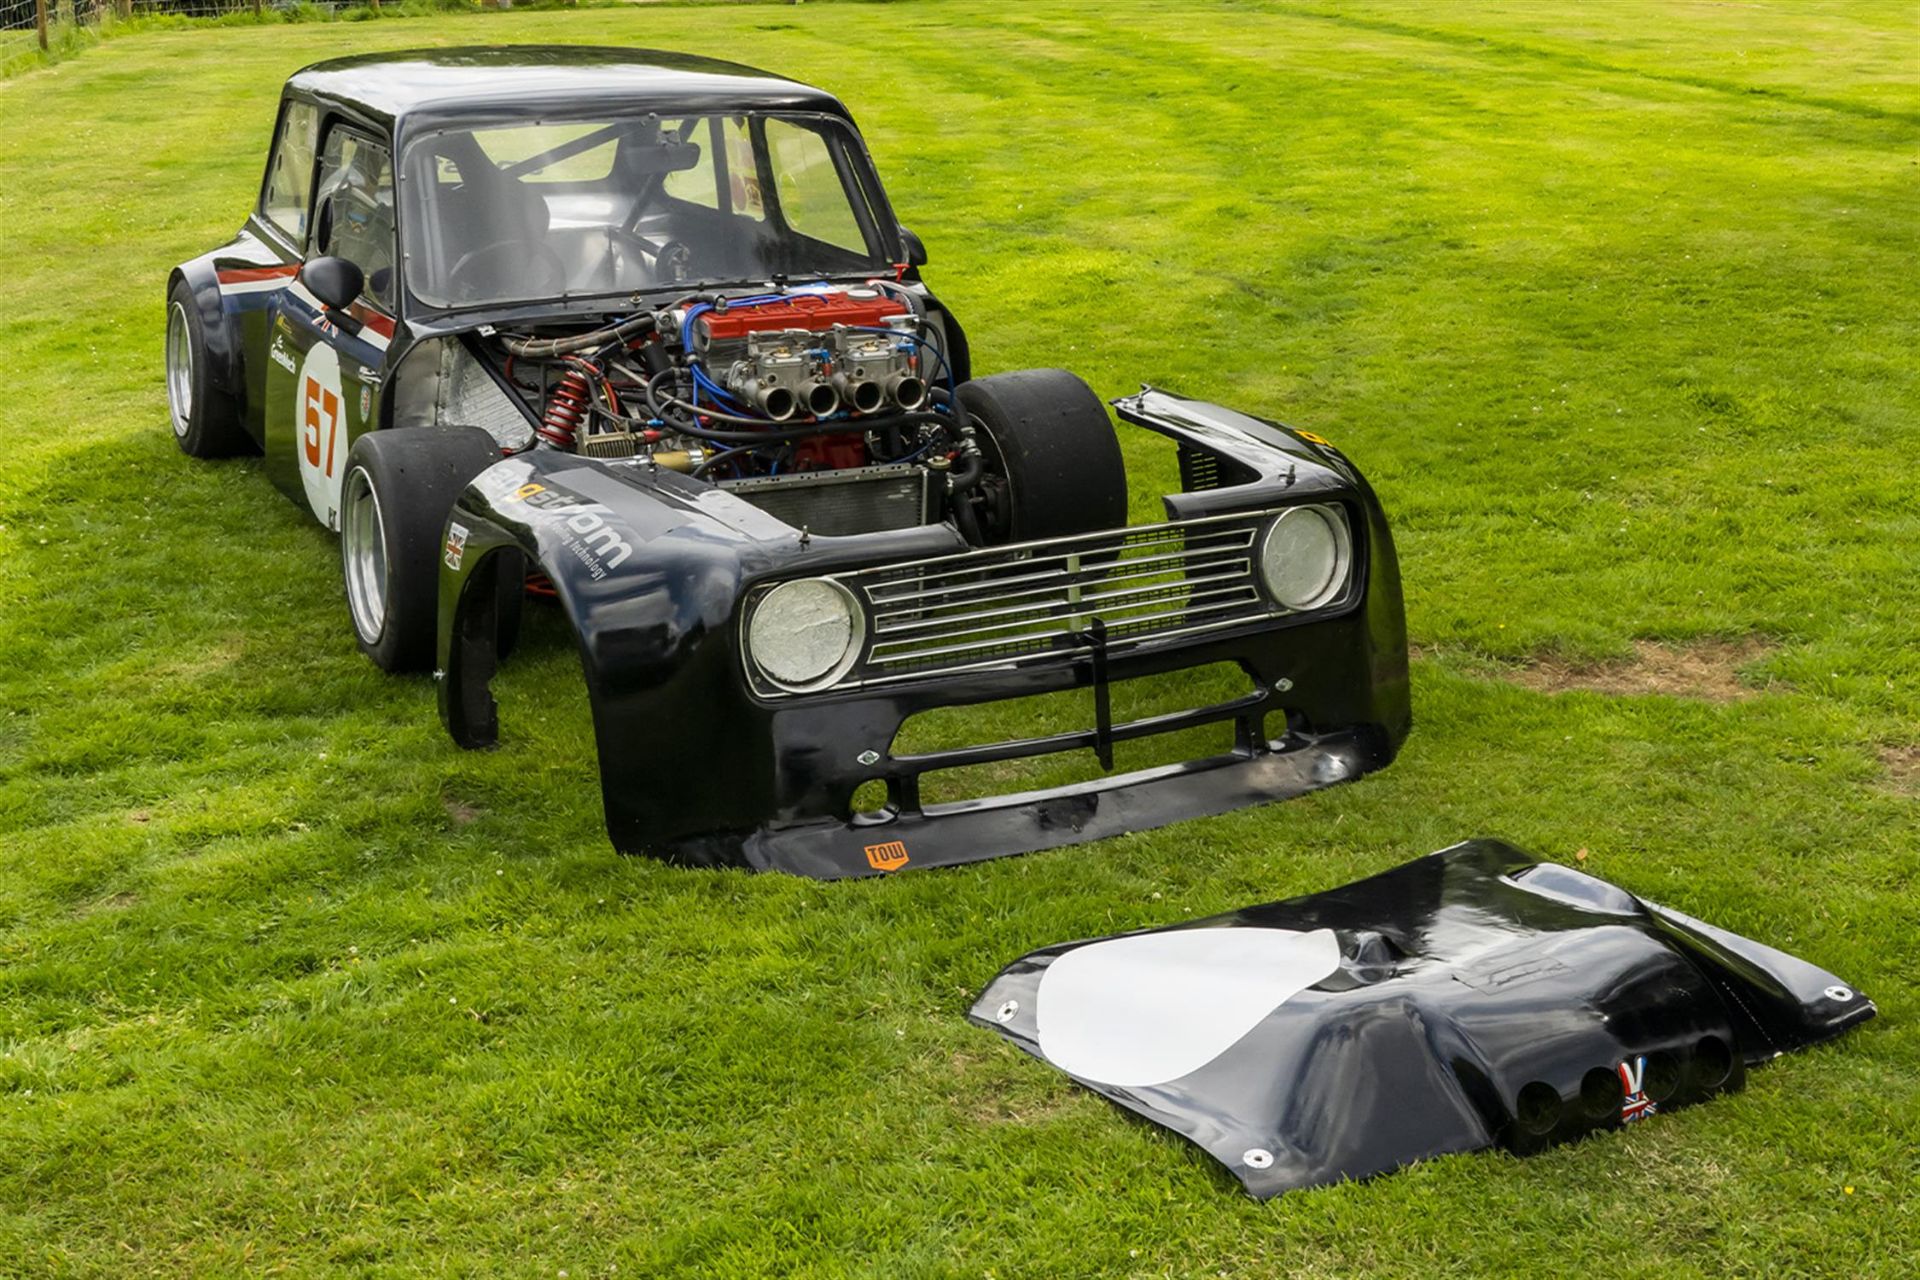 1979 Maguire Mini Twin-Cam TS.79.DH - Image 8 of 10